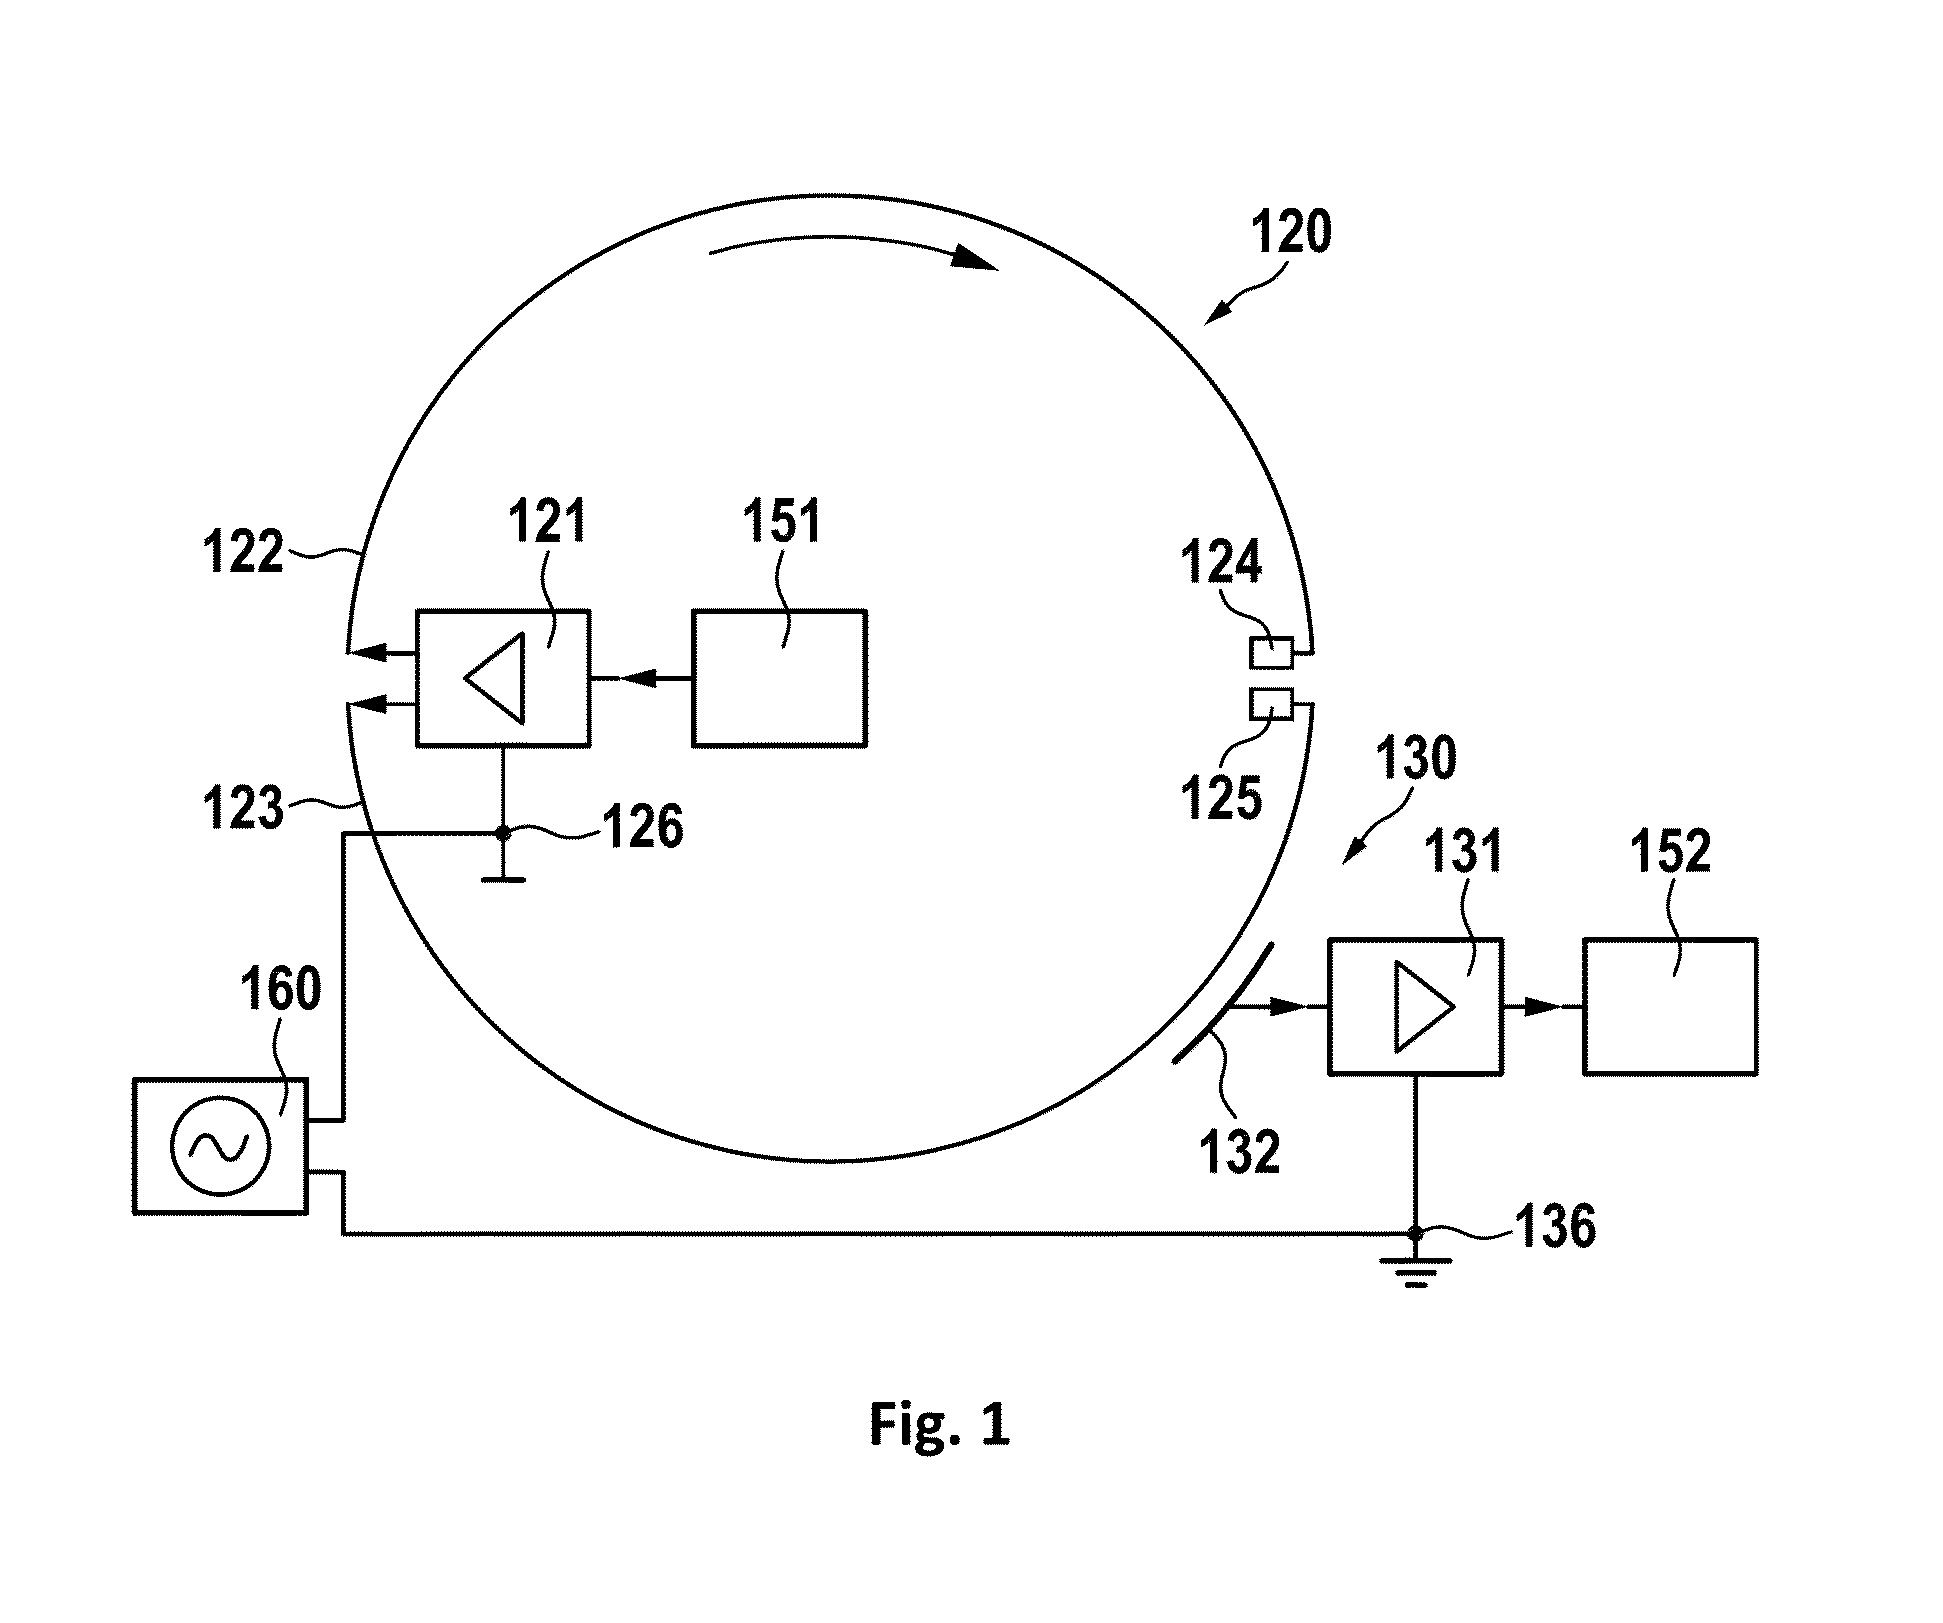 Method and Device for the Adjustment of Contactless Data Links